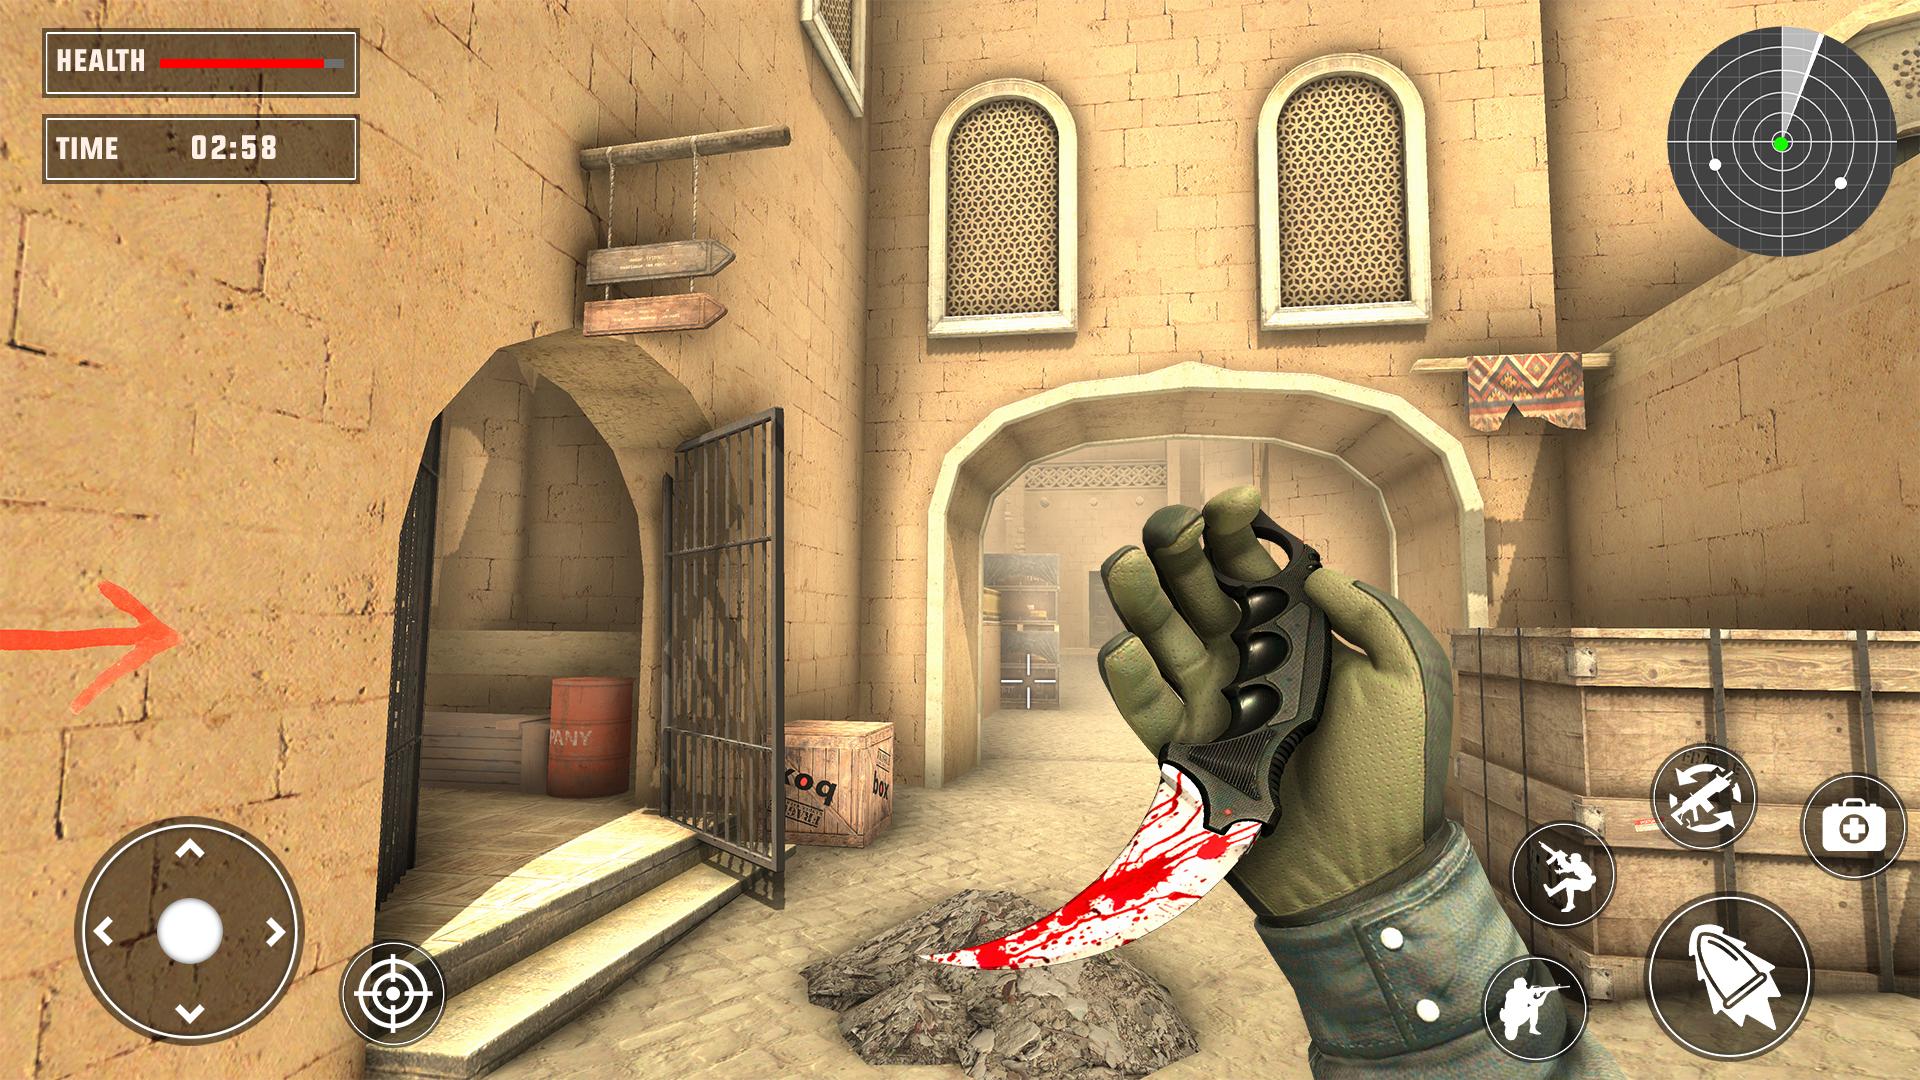 CS:GO Mobile - Counter Strike Go APK 1.09 - Download Free for Android